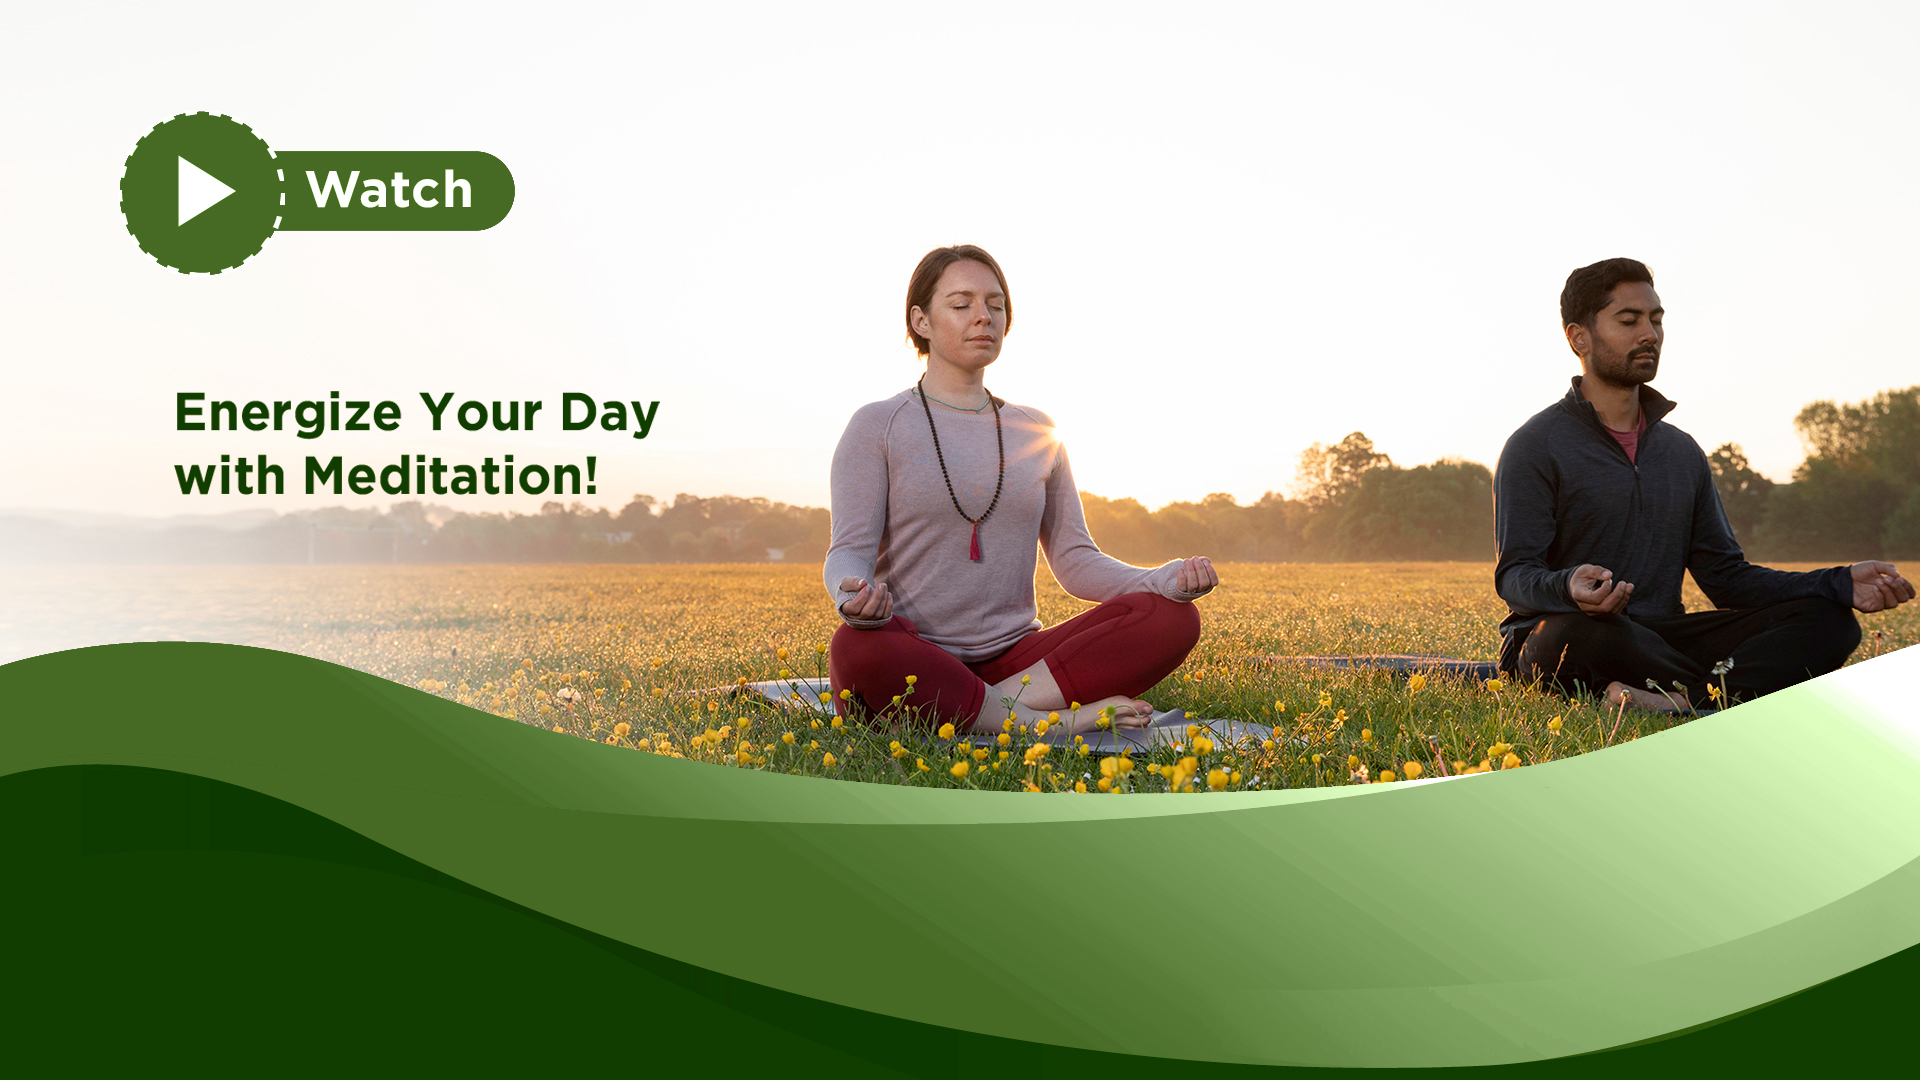 Energize Your Day with Meditation!